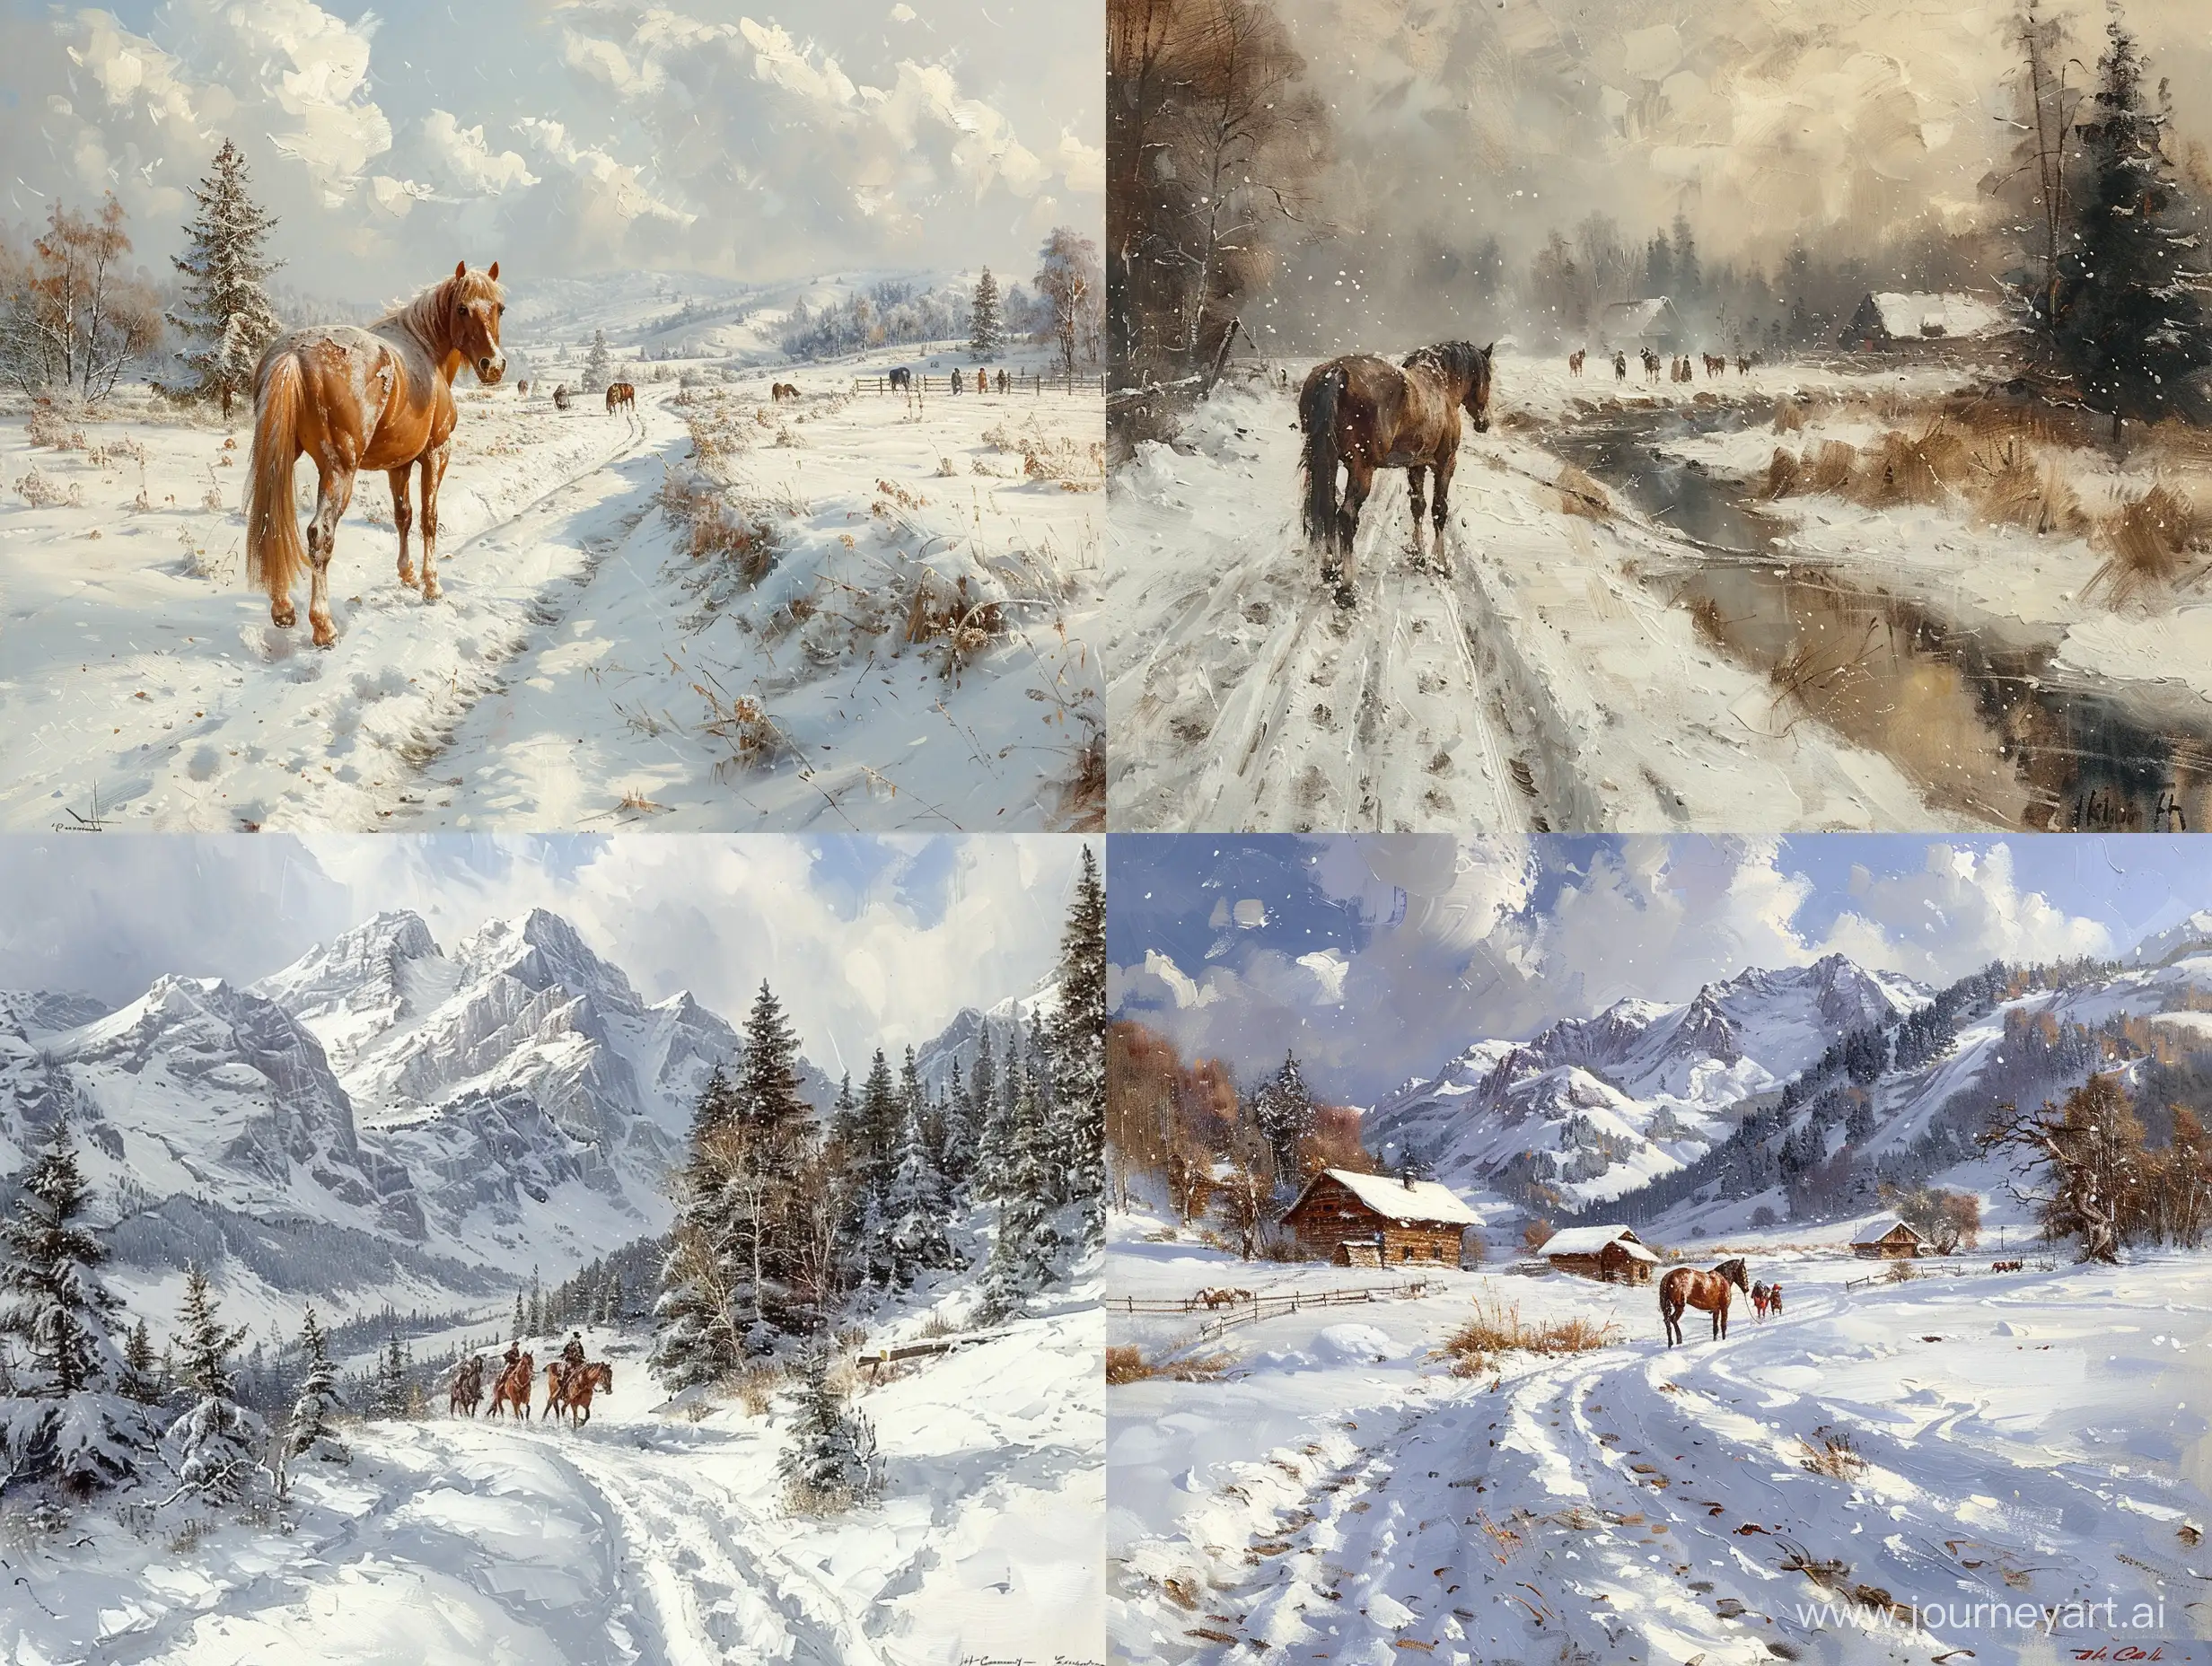 Realistic-Winter-Landscape-Painting-People-and-Horse-in-Snowy-Western-Country-Setting